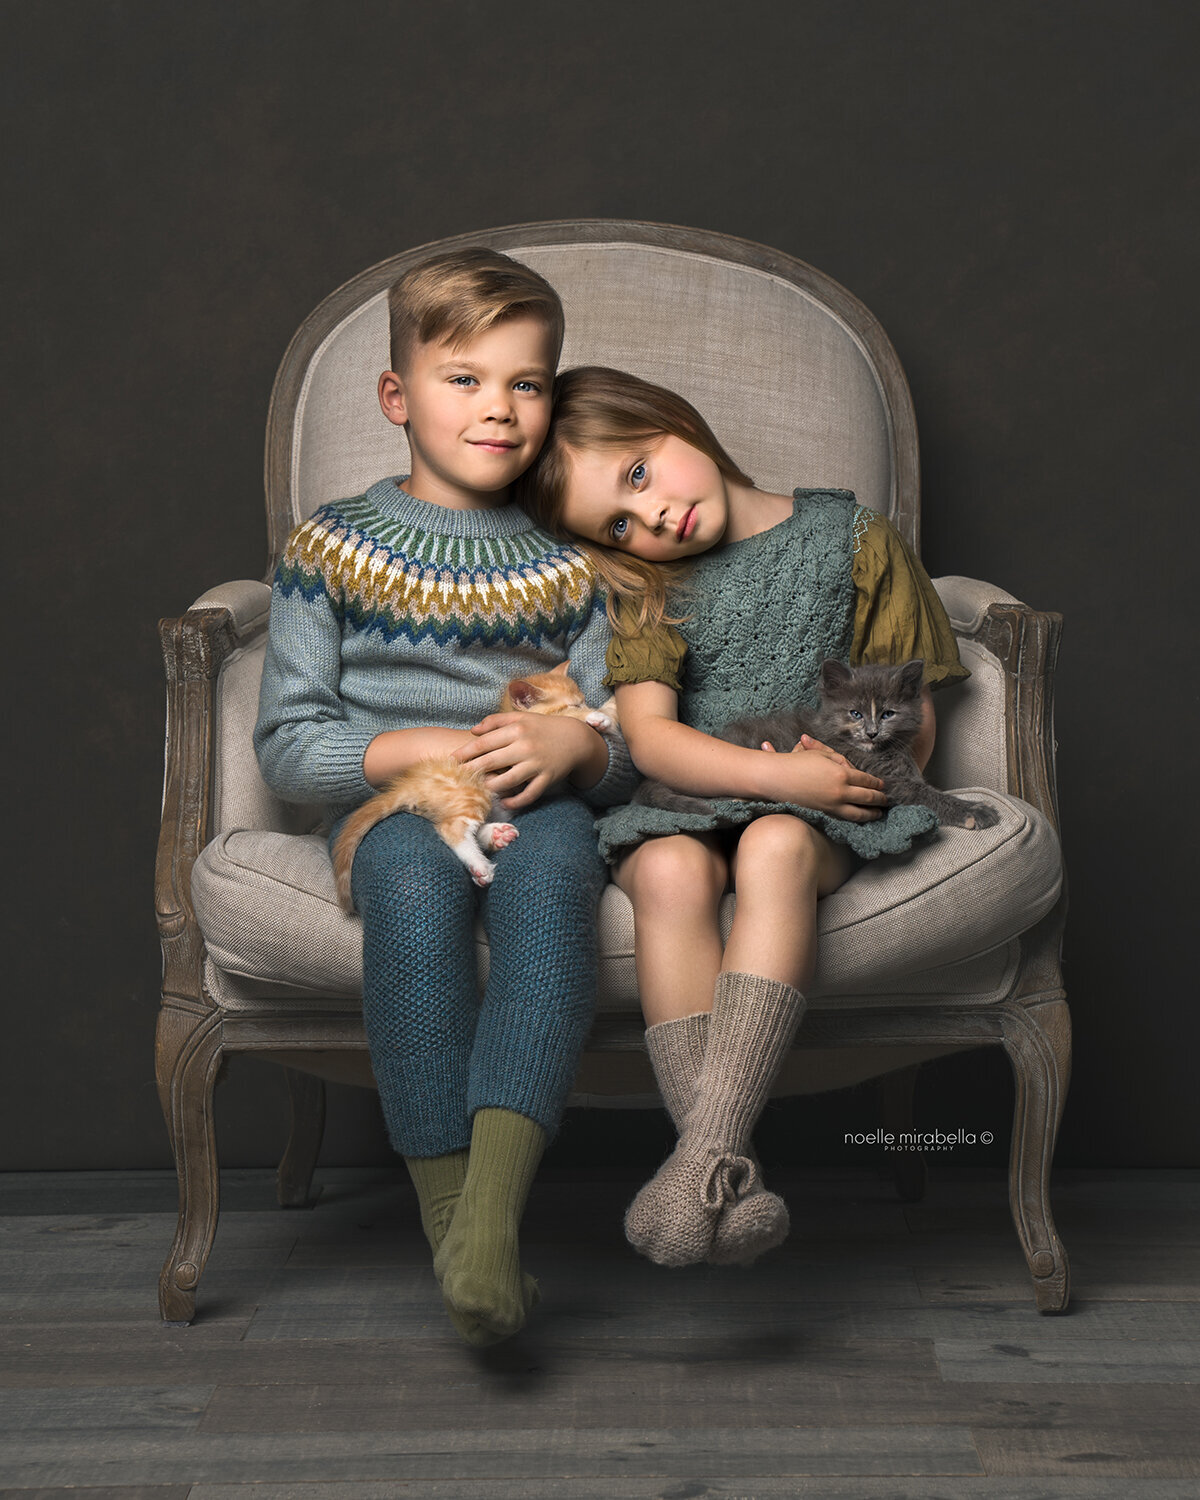 Children posed on vintage chair in a studio portrait